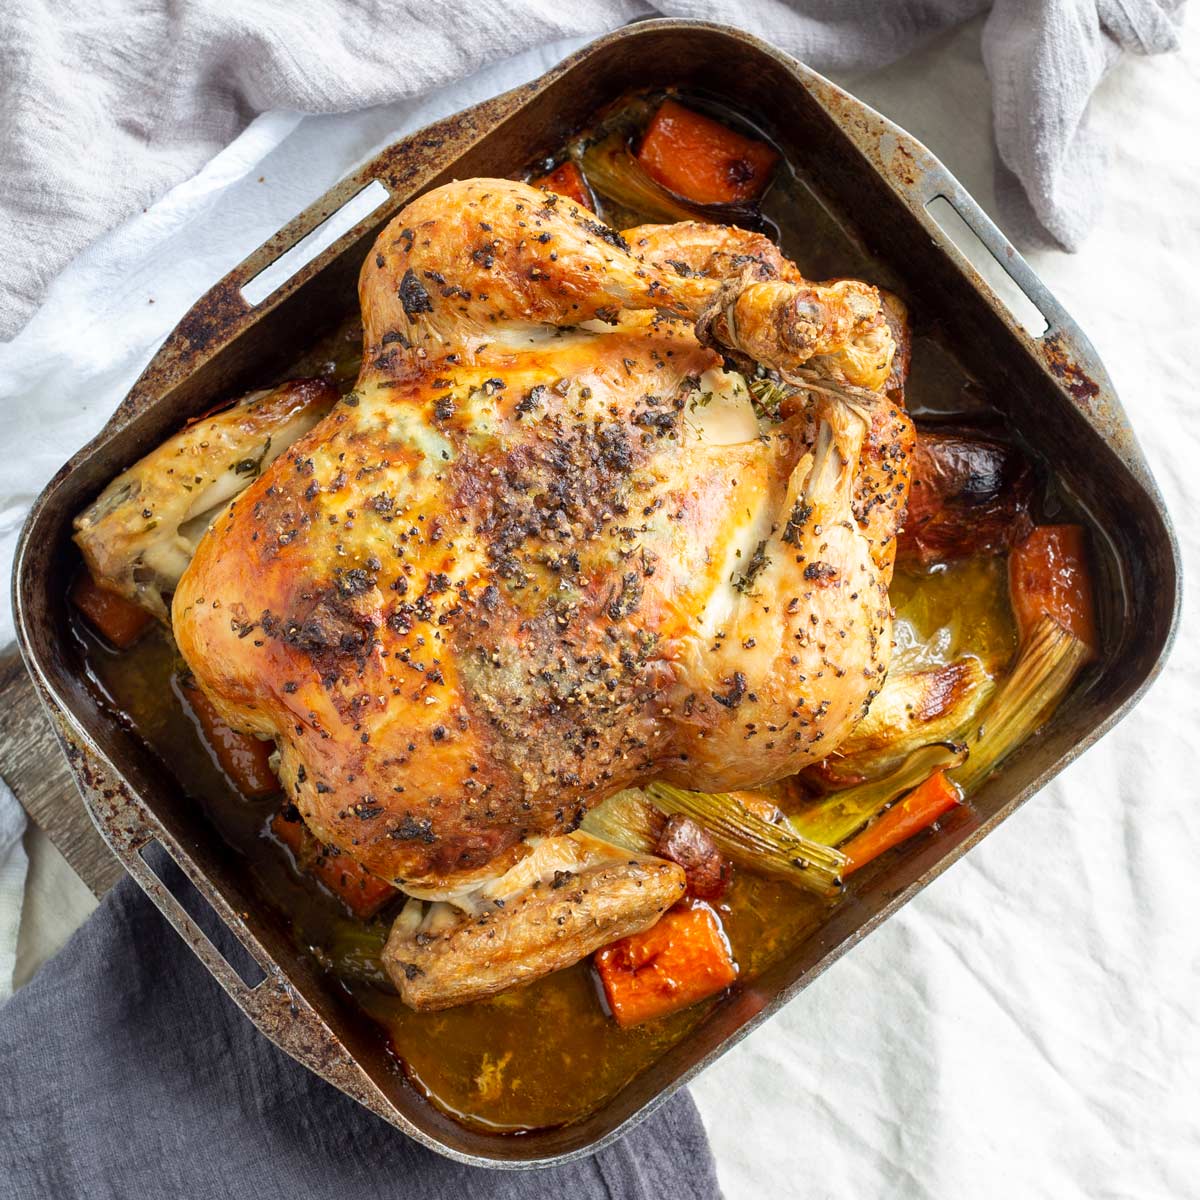 A trussed cooked roast chicken in a metal roasting dish